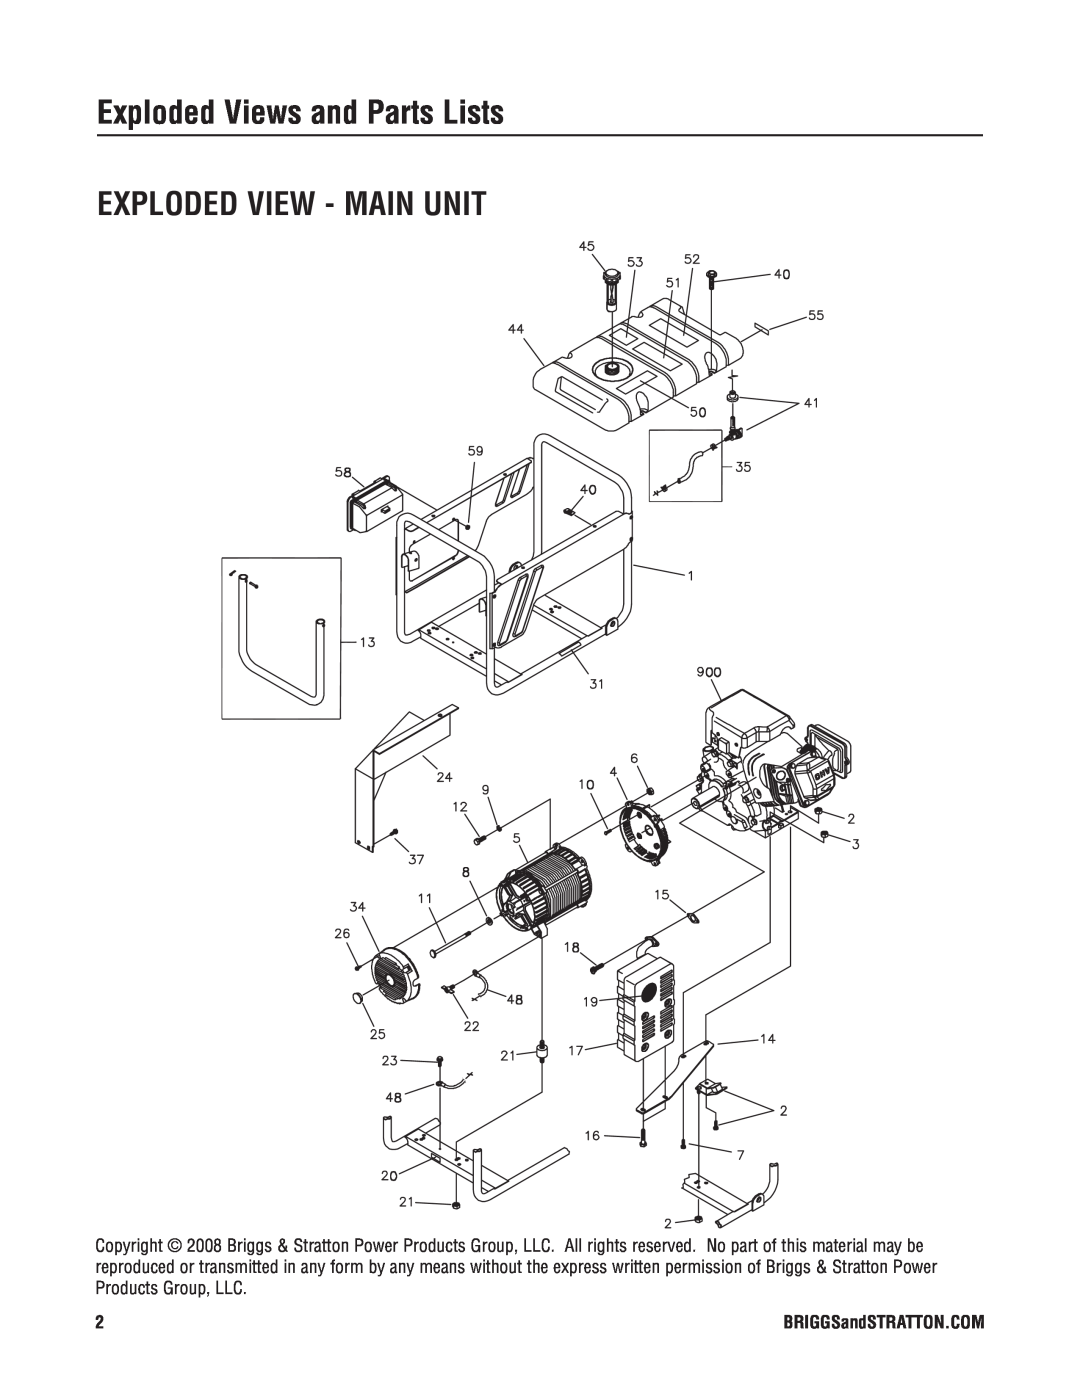 Briggs & Stratton 30424 manual Exploded Views and Parts Lists, Exploded View - Main Unit 